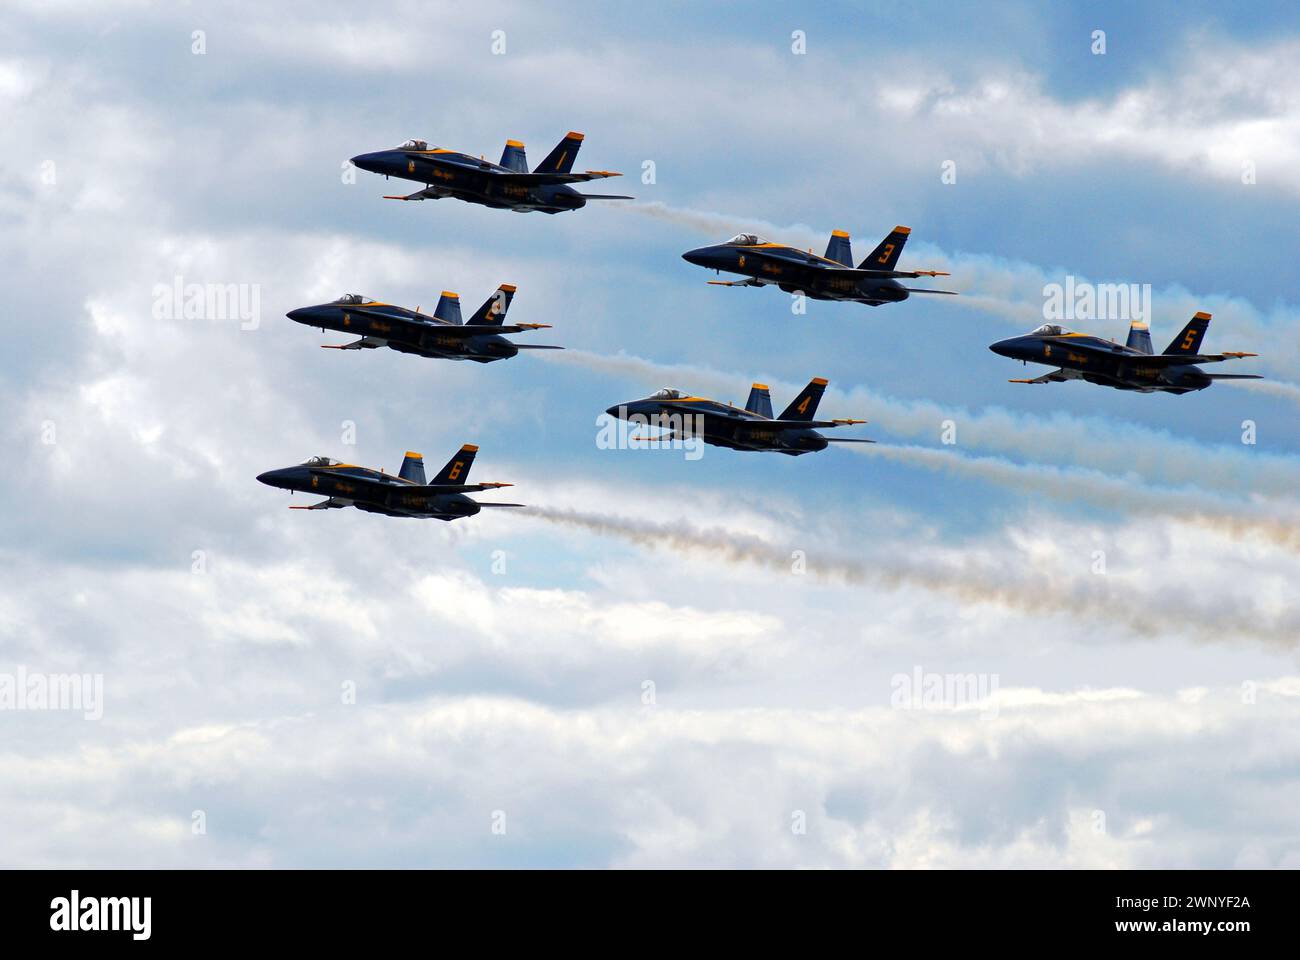 The Blue Angels perform a delta formation at an airshow at Jones Beach, New York. Stock Photo